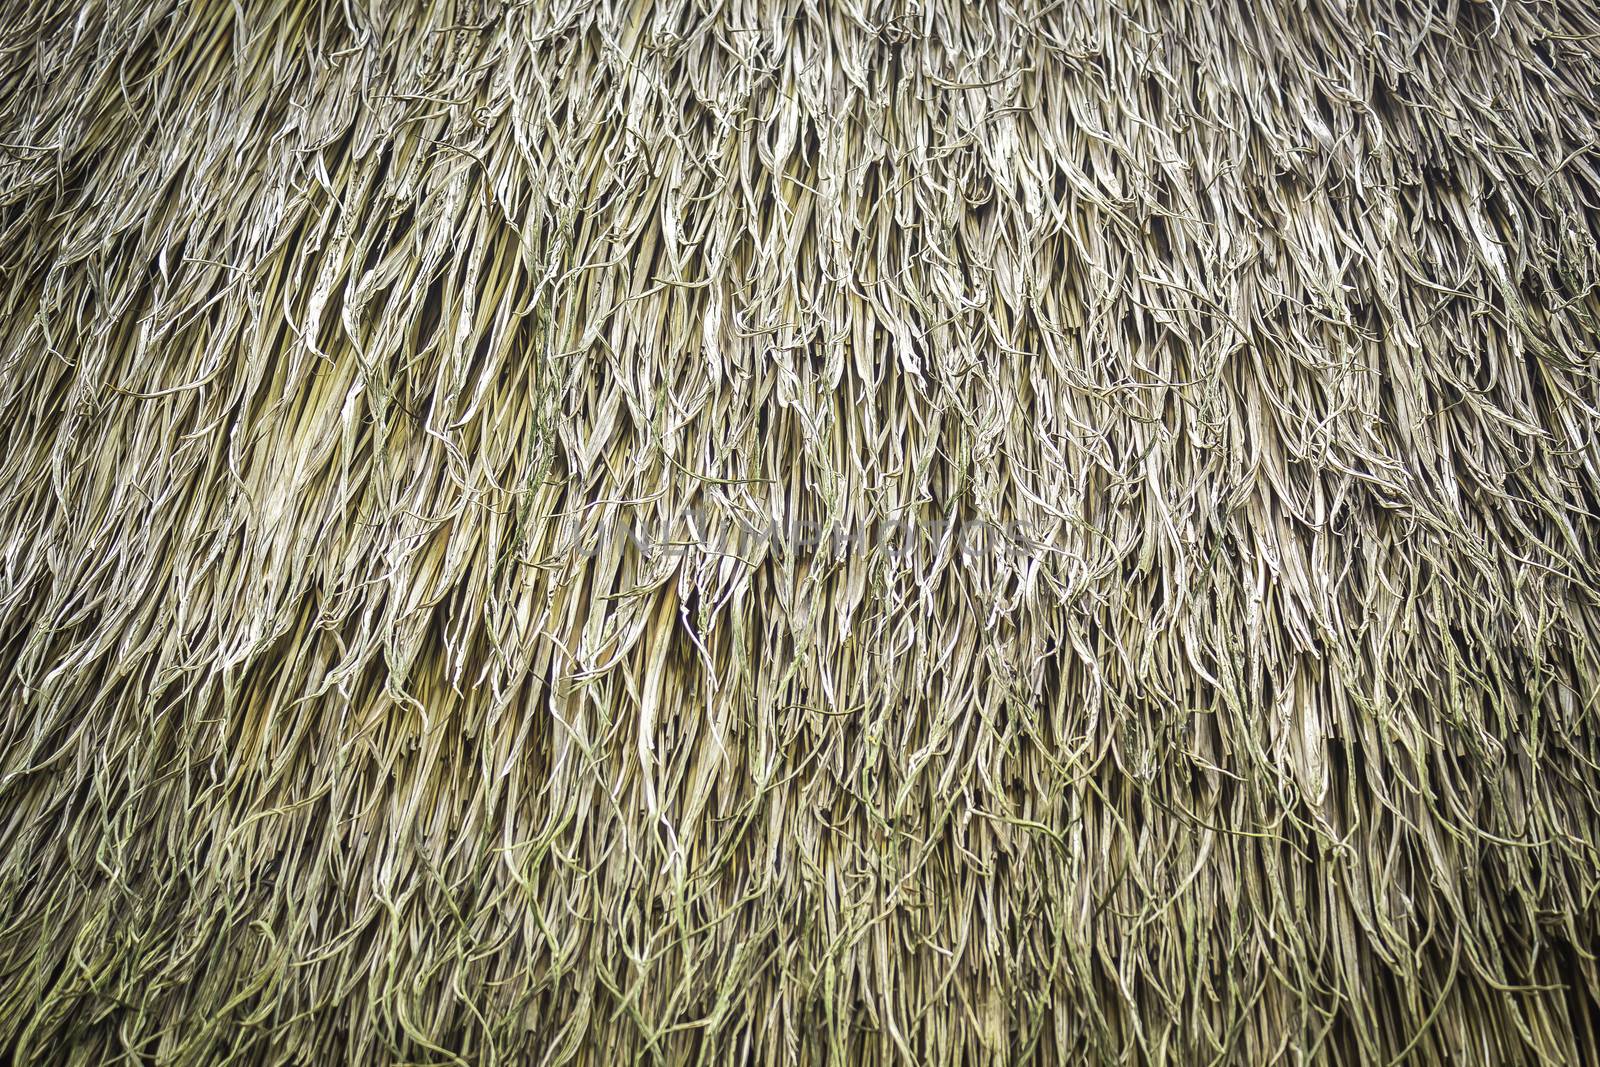 Texture and pattern of grasses thatch roof